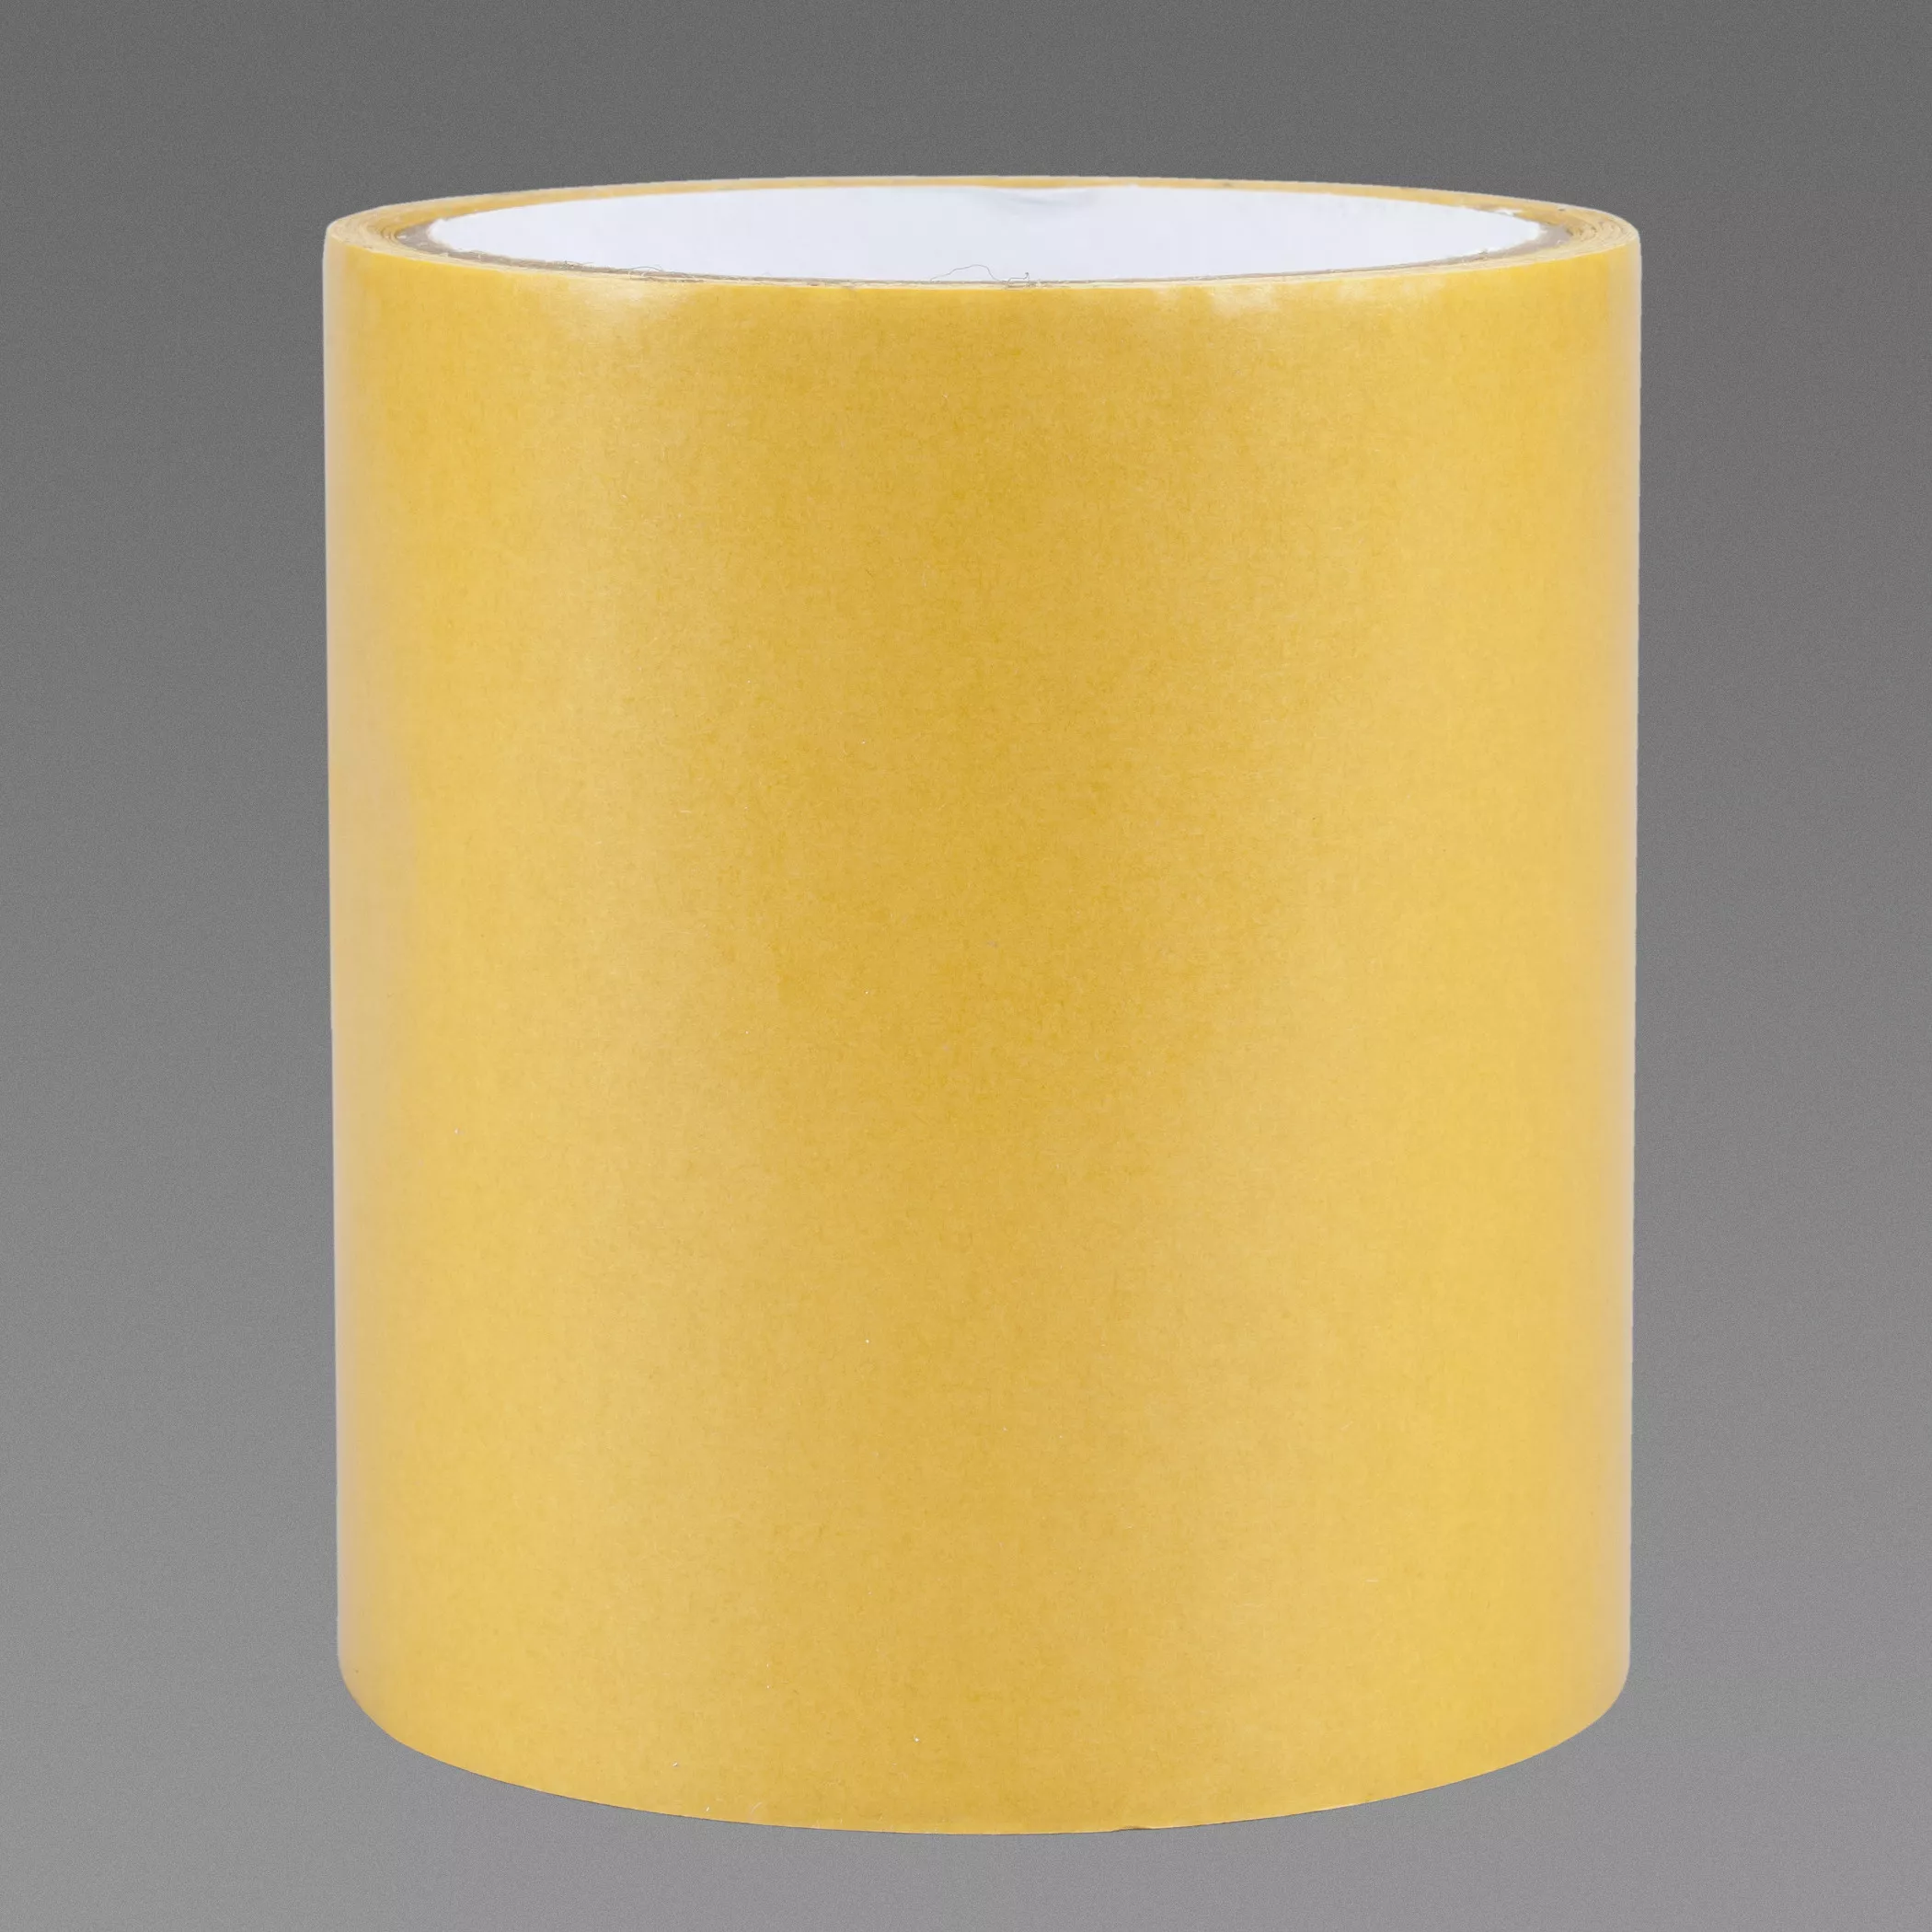 3M™ Scrim Reinforced Adhesive Transfer Adhesive 97053, 54 in x 650 yd,
2.5 mil, 1 Roll/Pallet